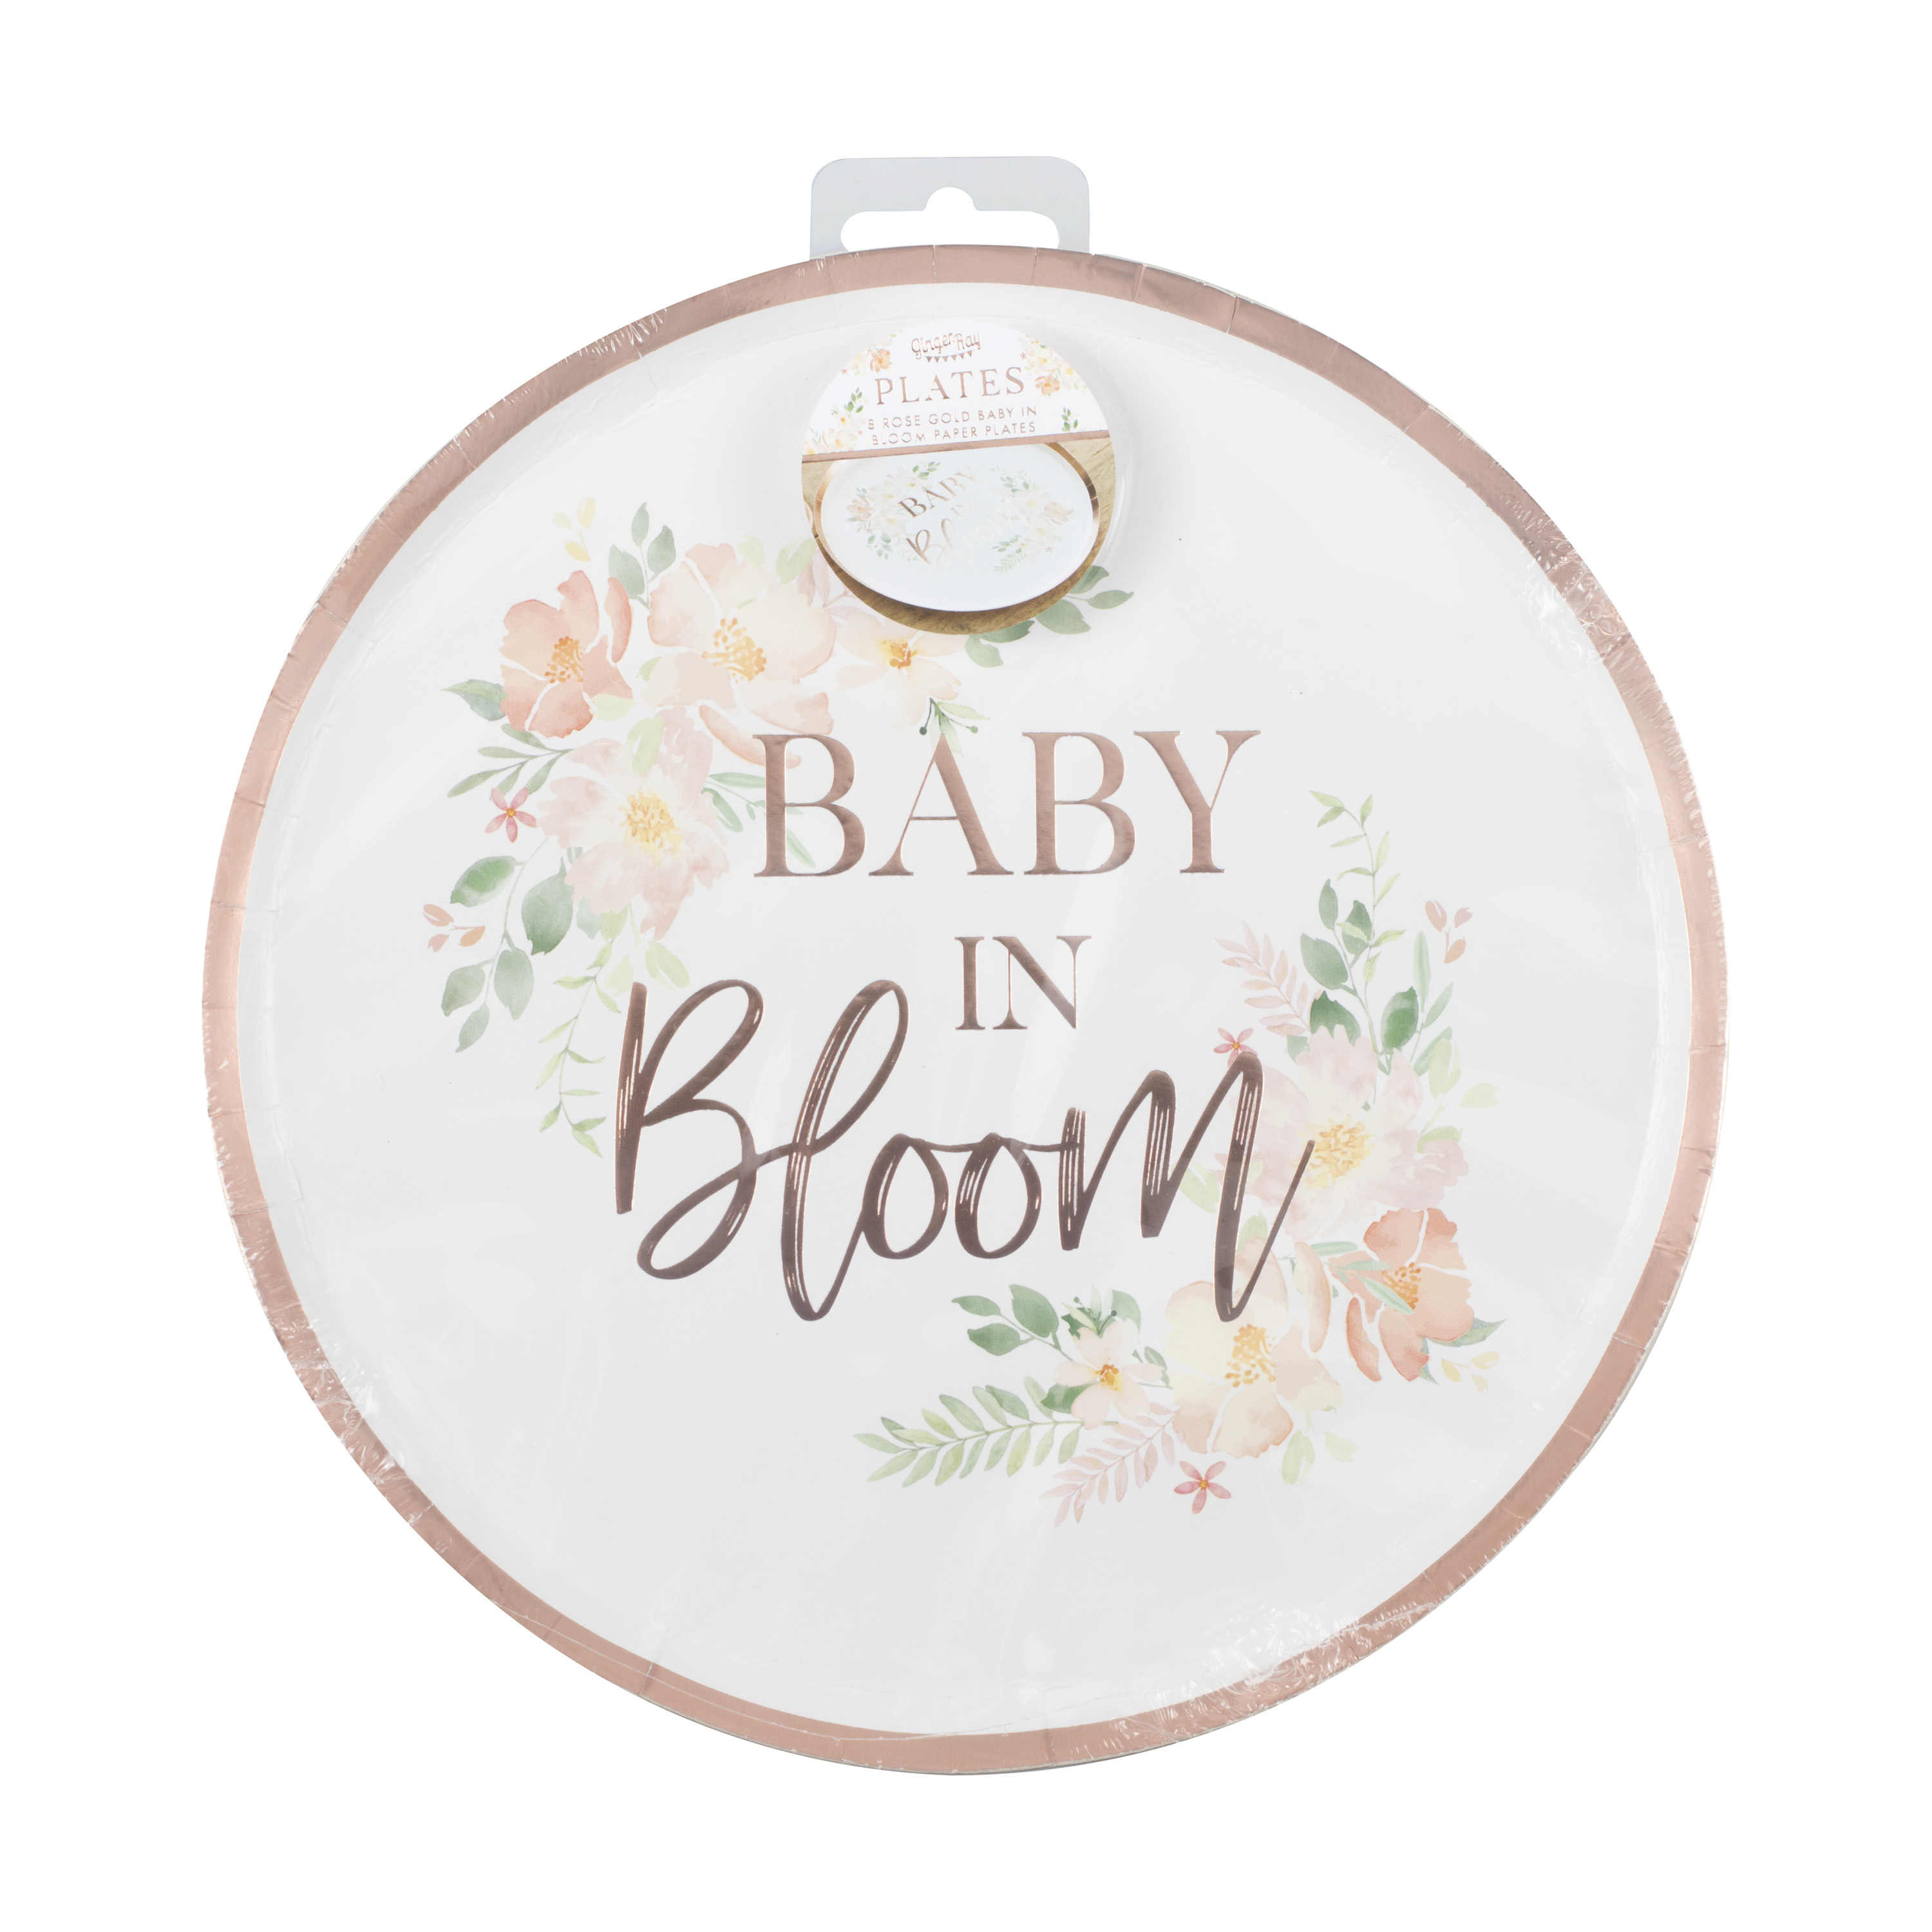 8 Plate - Floral Baby in Bloom - Foiled